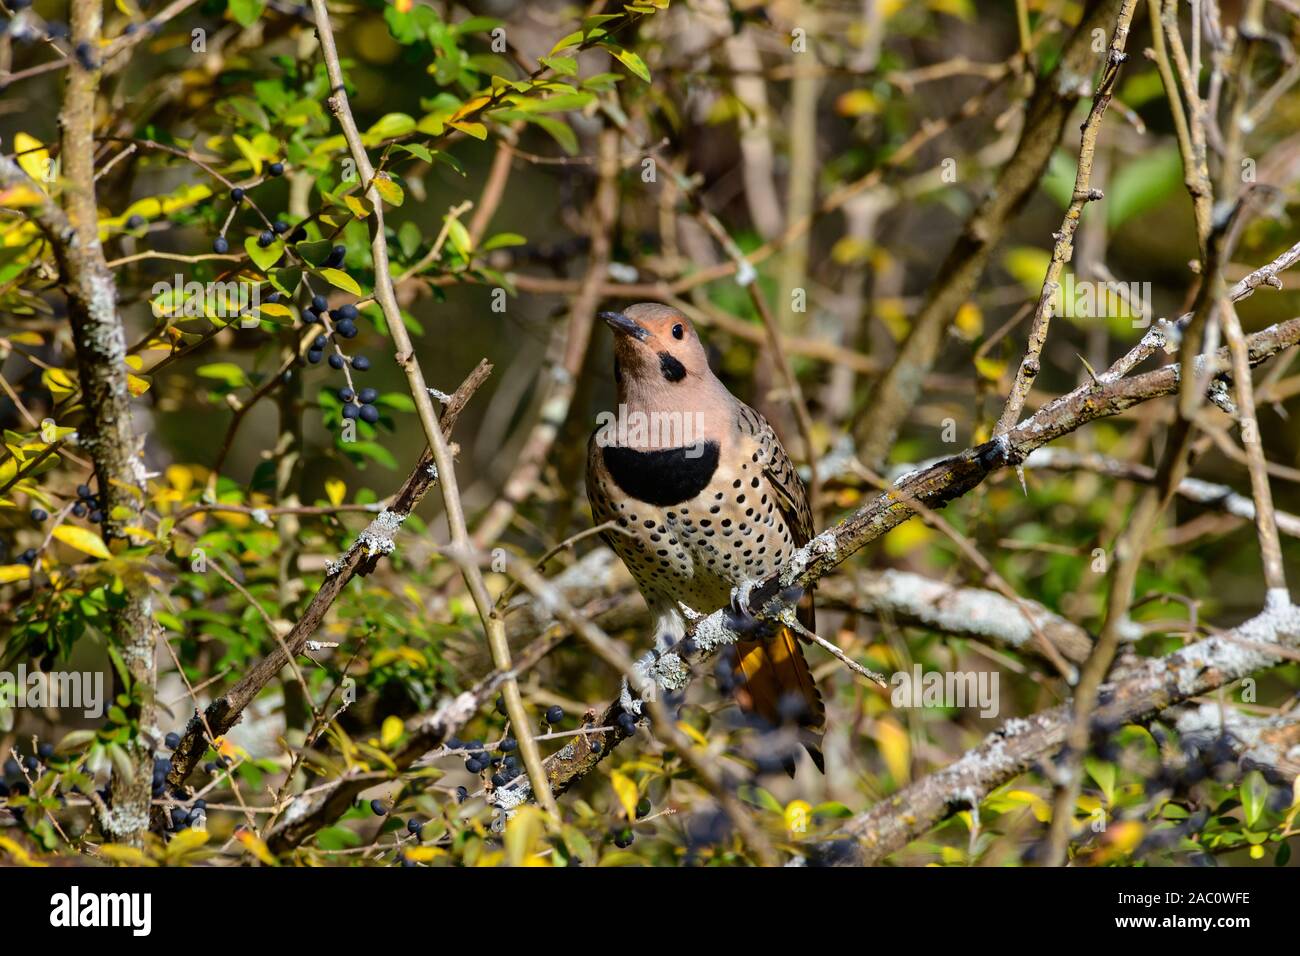 Northern Flicker - Colaptes auratus - Yellow-shafted, perched on a branch detailed close-up Stock Photo